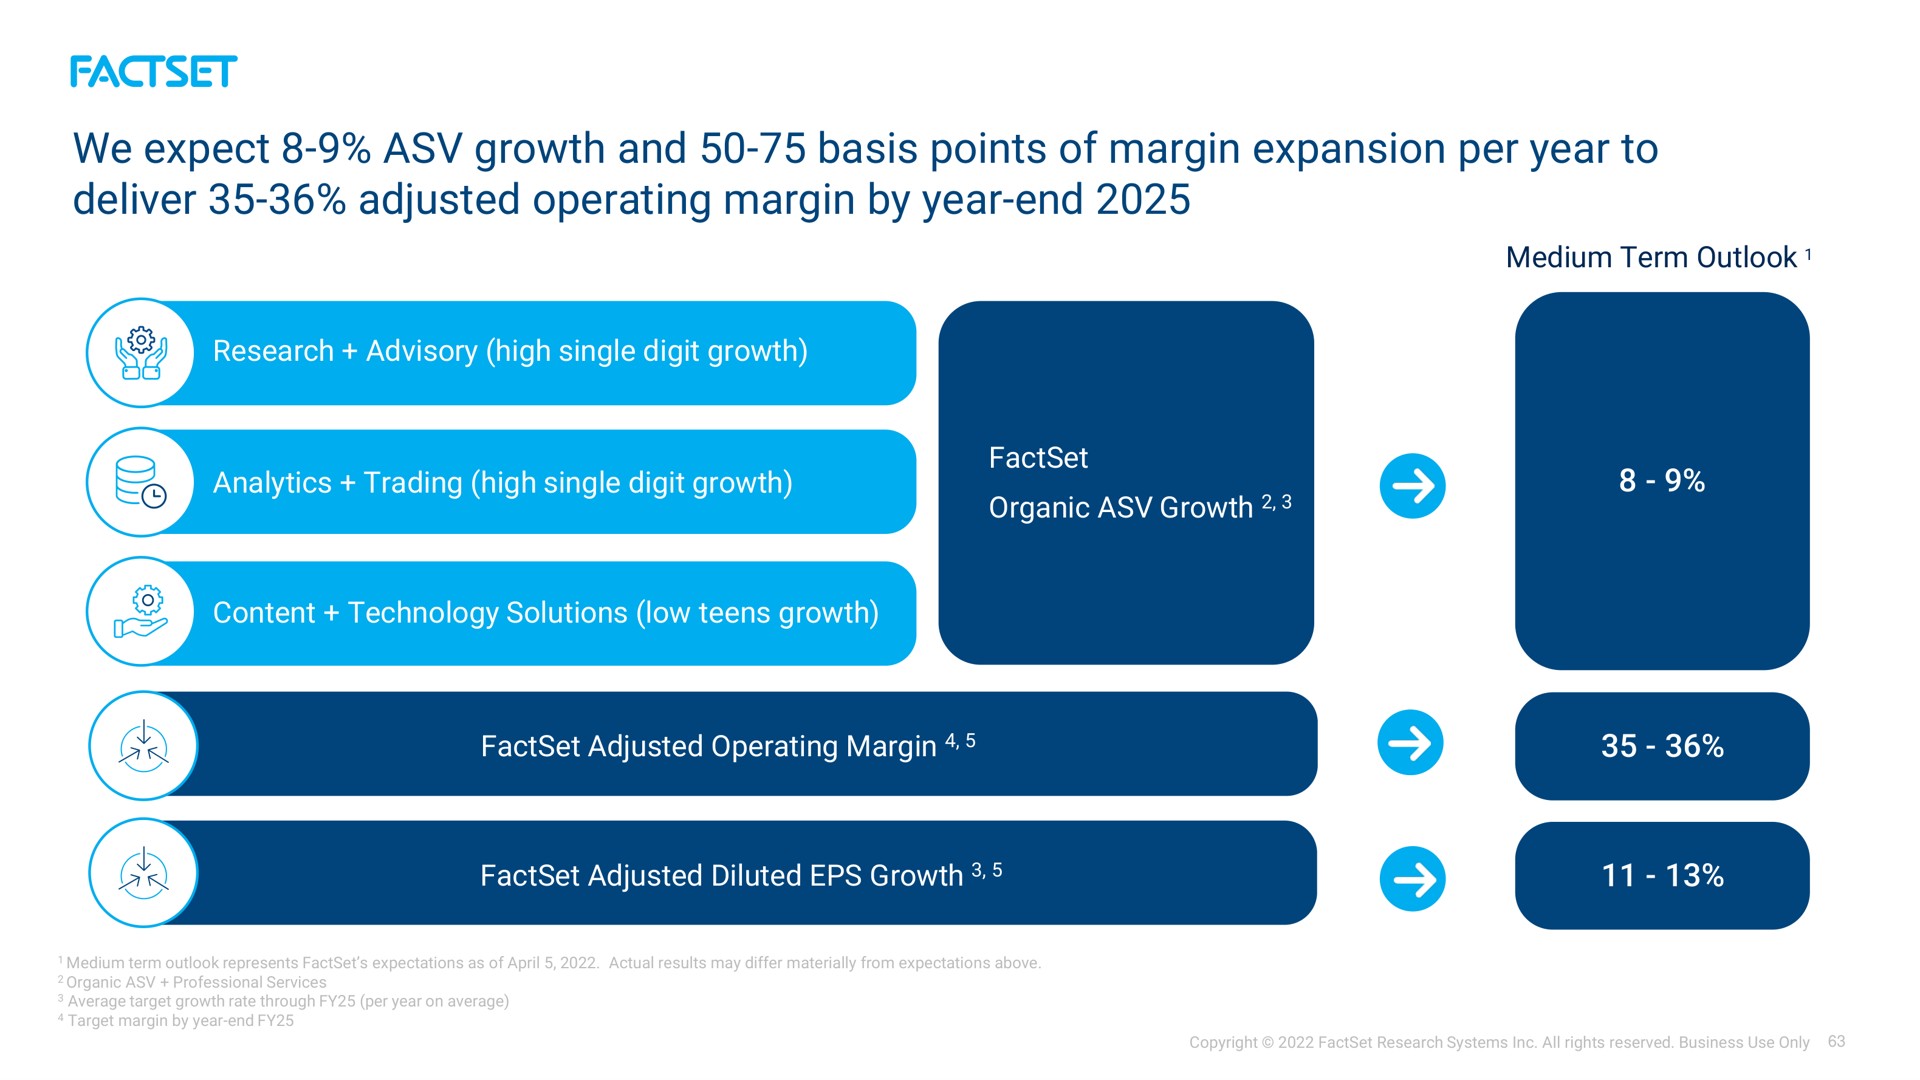 we expect growth and basis points of margin expansion per year to deliver adjusted operating margin by year end | Factset